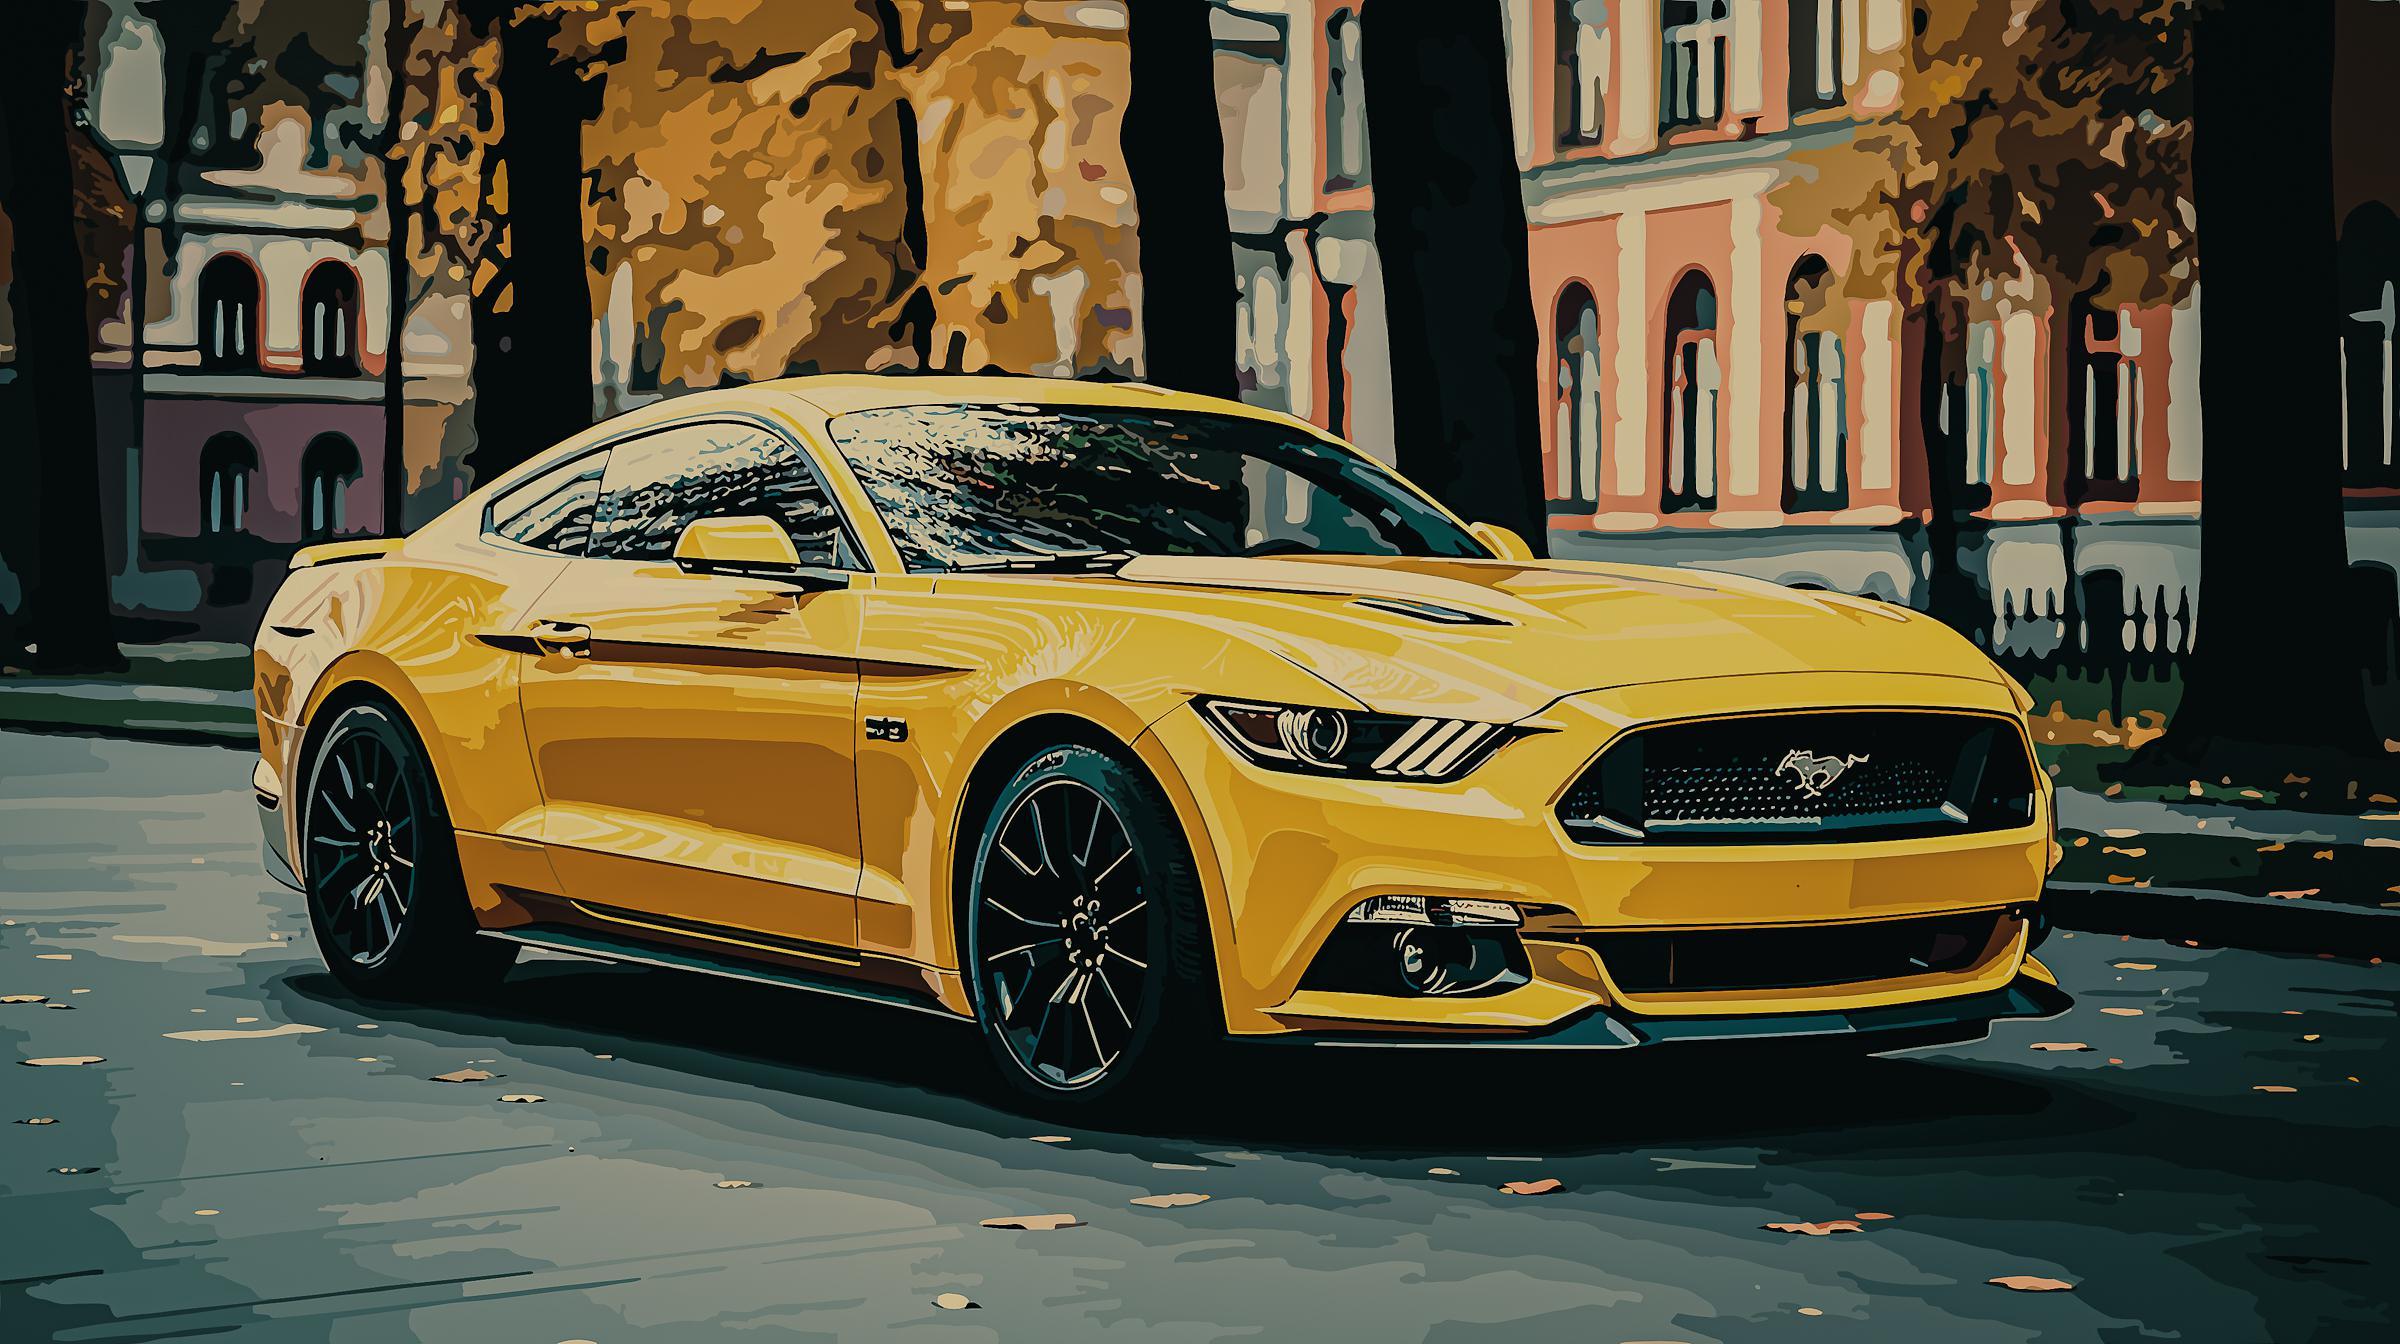 The Ford Mustang R Aiart